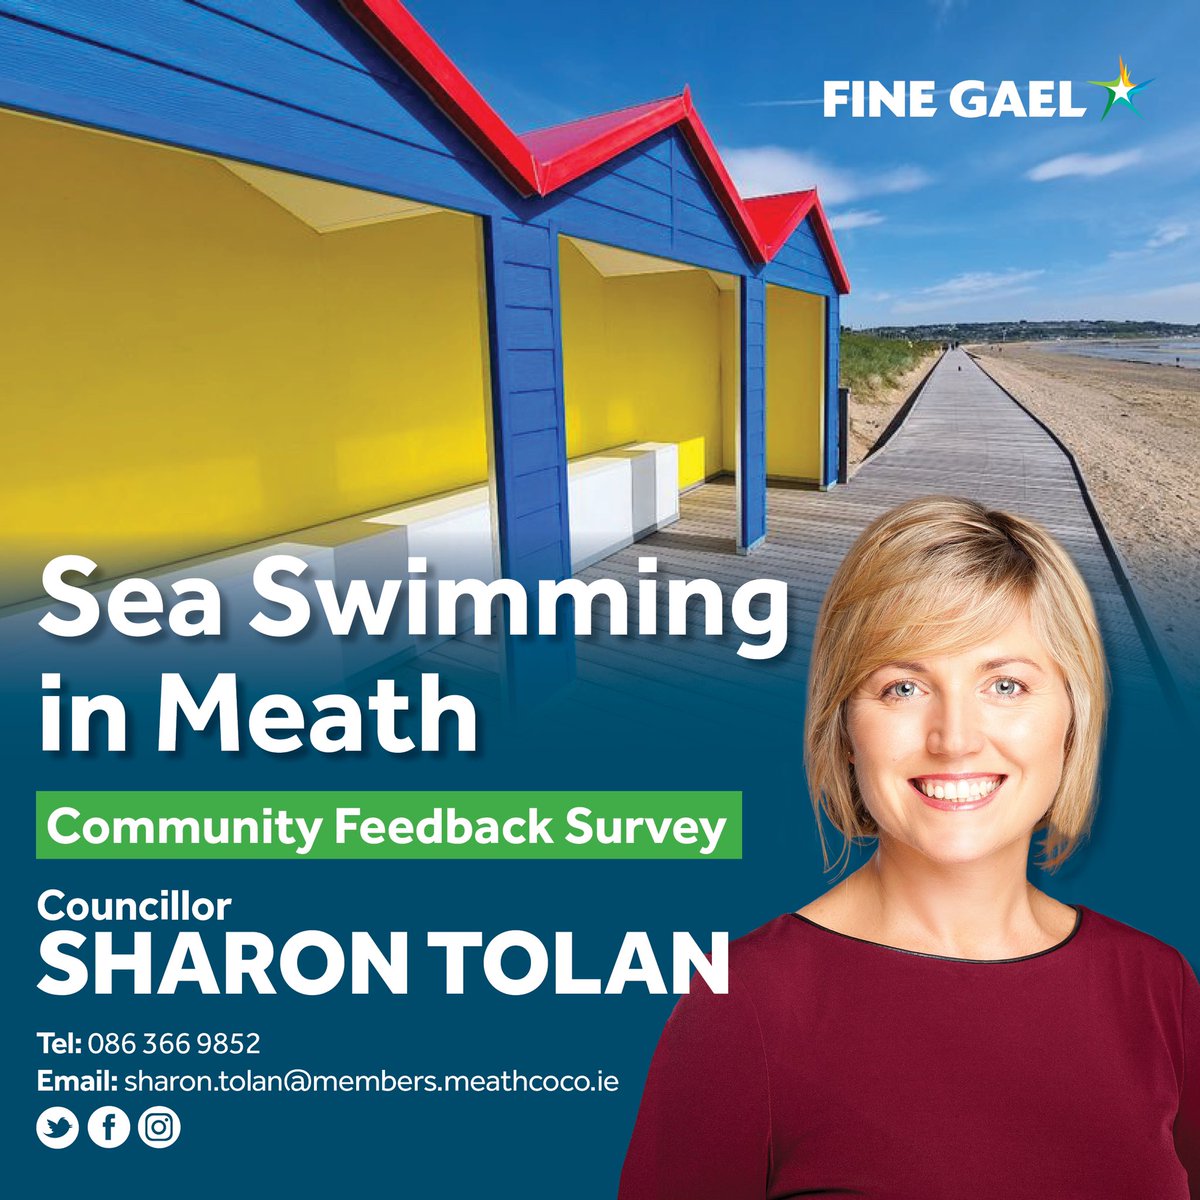 Have you discovered a love of sea swimming in Meath? Would you like to see facilities to improve your experience? Please complete my survey below ⬇️ and share it with any swimmers you know, to help me gather info for funding application. surveymonkey.com/r/FPNGGQH